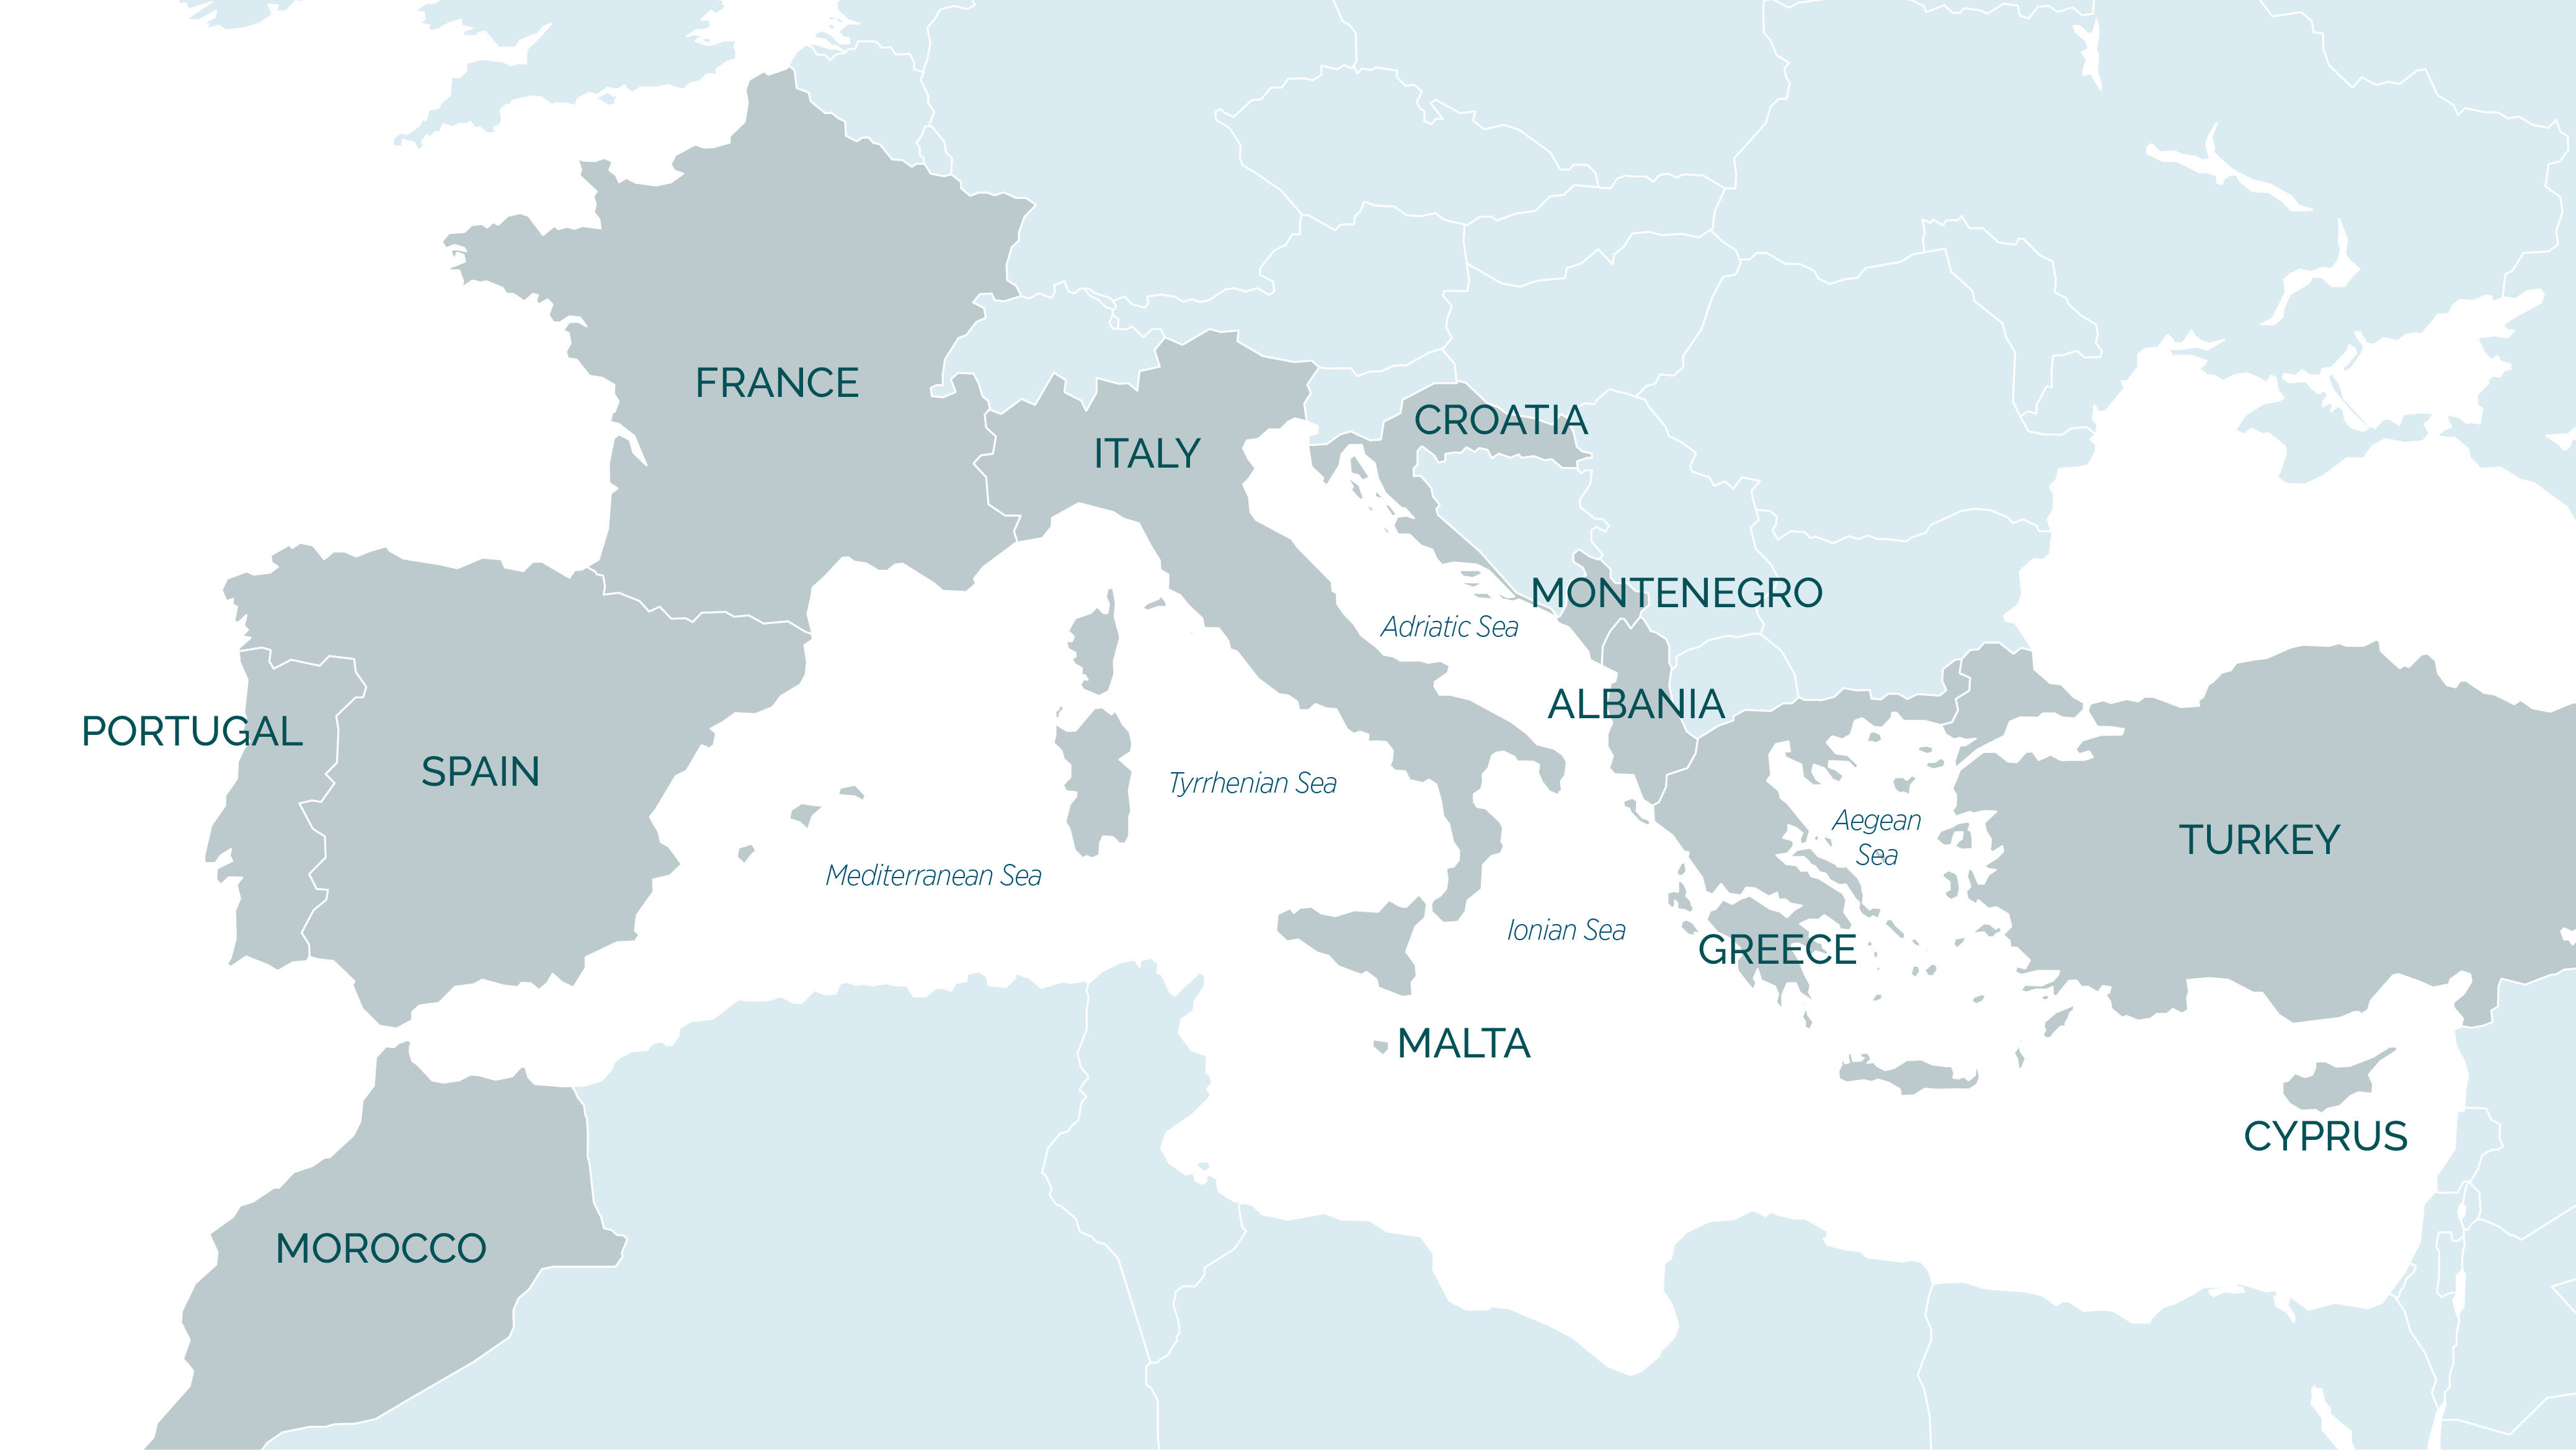 Map of the Mediterranean including France, Italy, Croatia and Turkey